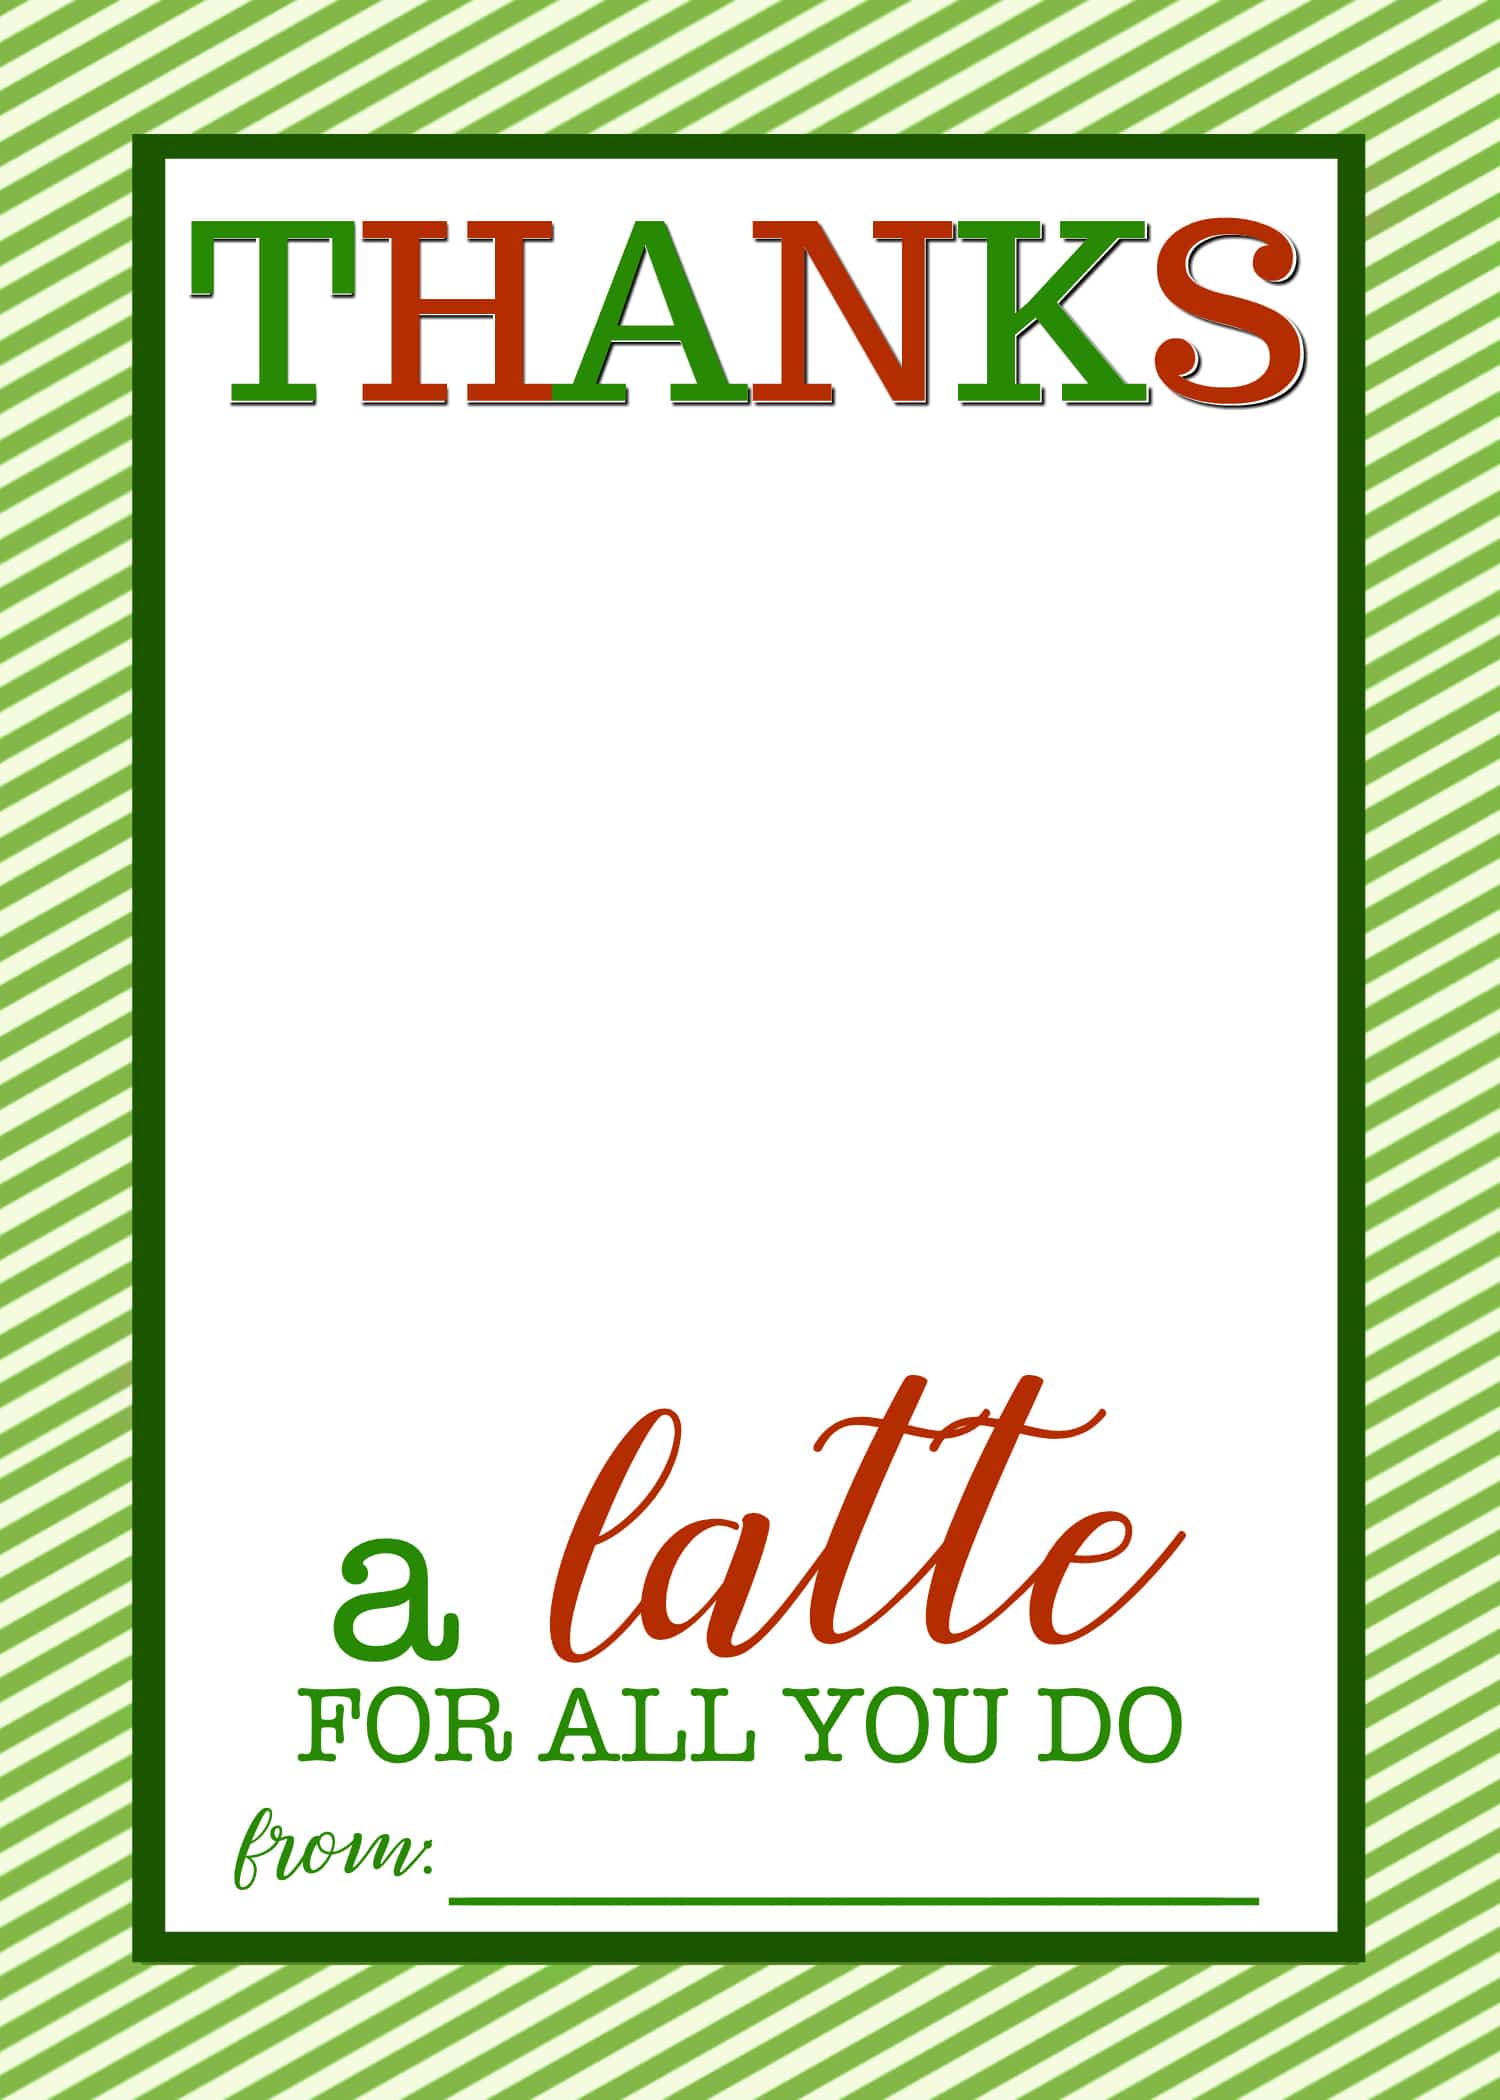 Thanks a Latte Printable - Green by crazyadventuresinparenting.com